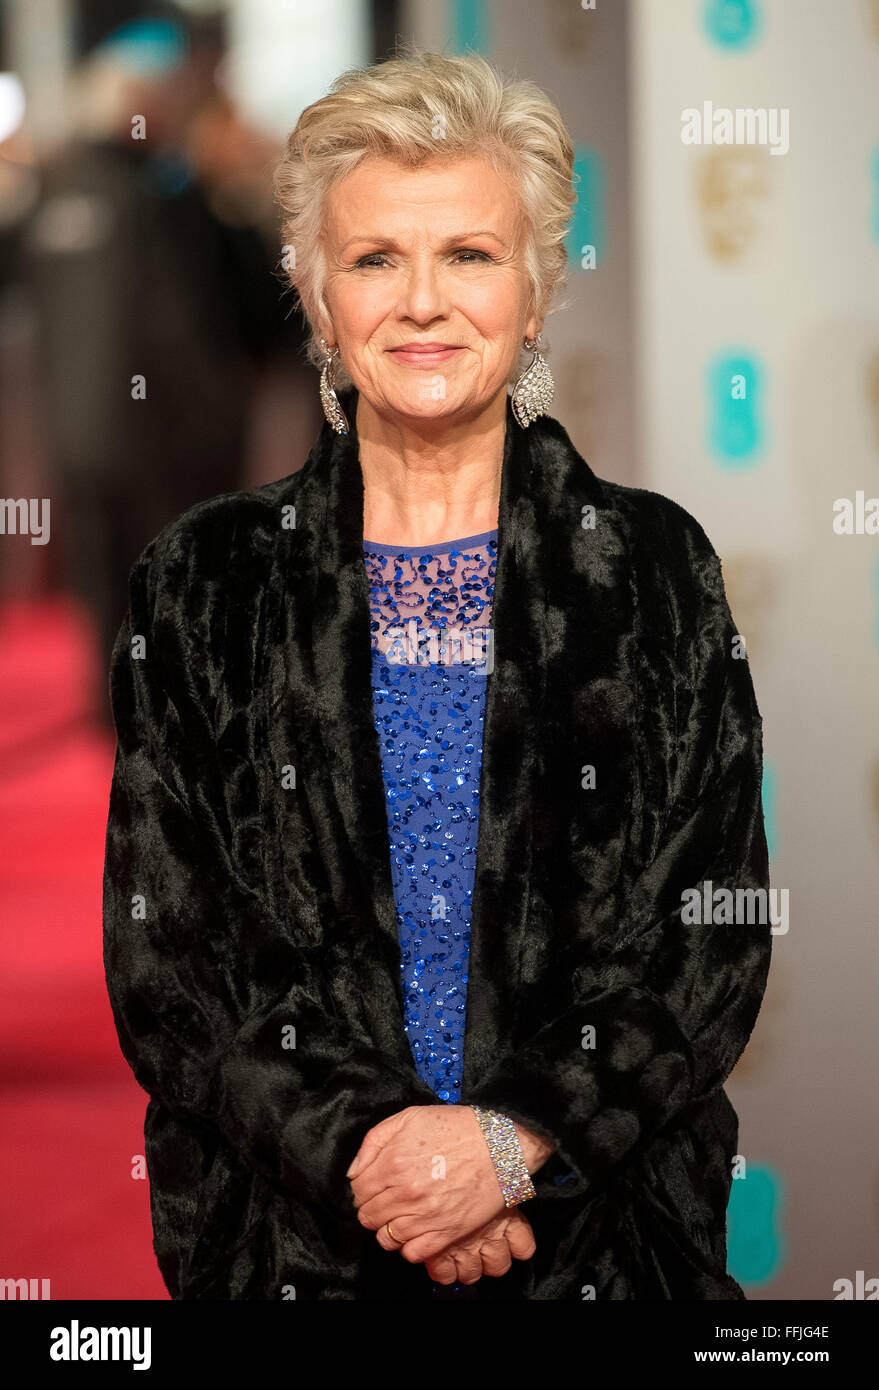 London, UK. 14th February, 2016. Actress Julie Walters arrives at the EE British Academy Film Awards, BAFTA Awards, at the Royal Opera House in London, England, on 14 February 2016. Credit:  dpa picture alliance/Alamy Live News Stock Photo